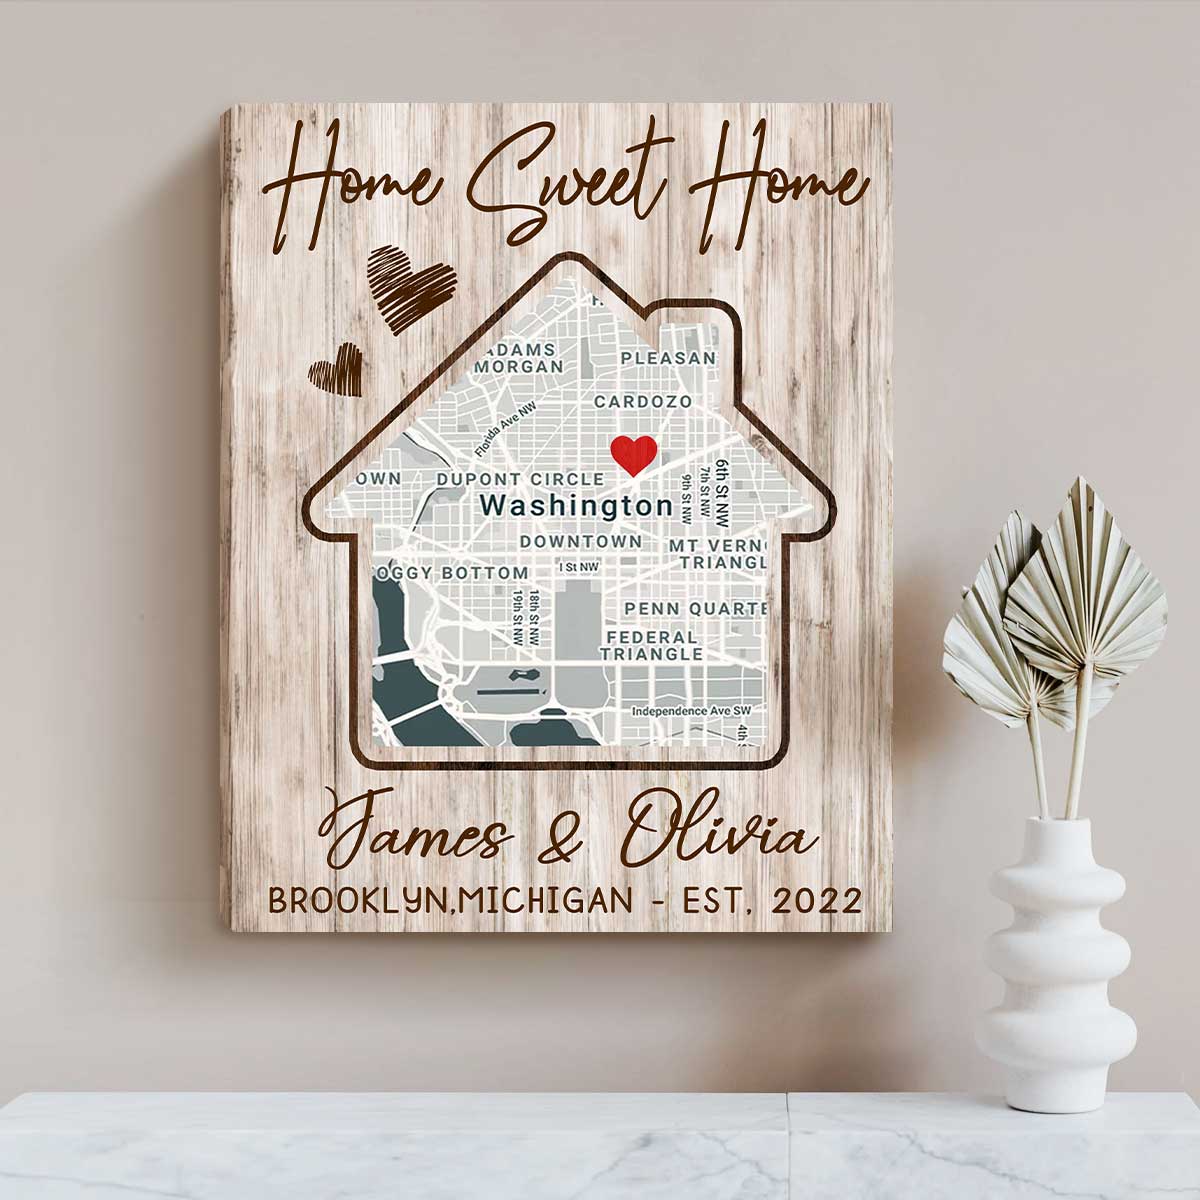 https://benicee.com/wp-content/uploads/2022/09/Best-Housewarming-Gifts-Gifts-for-New-Homeowners-Our-First-Home-Custom-Map-Print-New-House-Gifts-3.jpeg